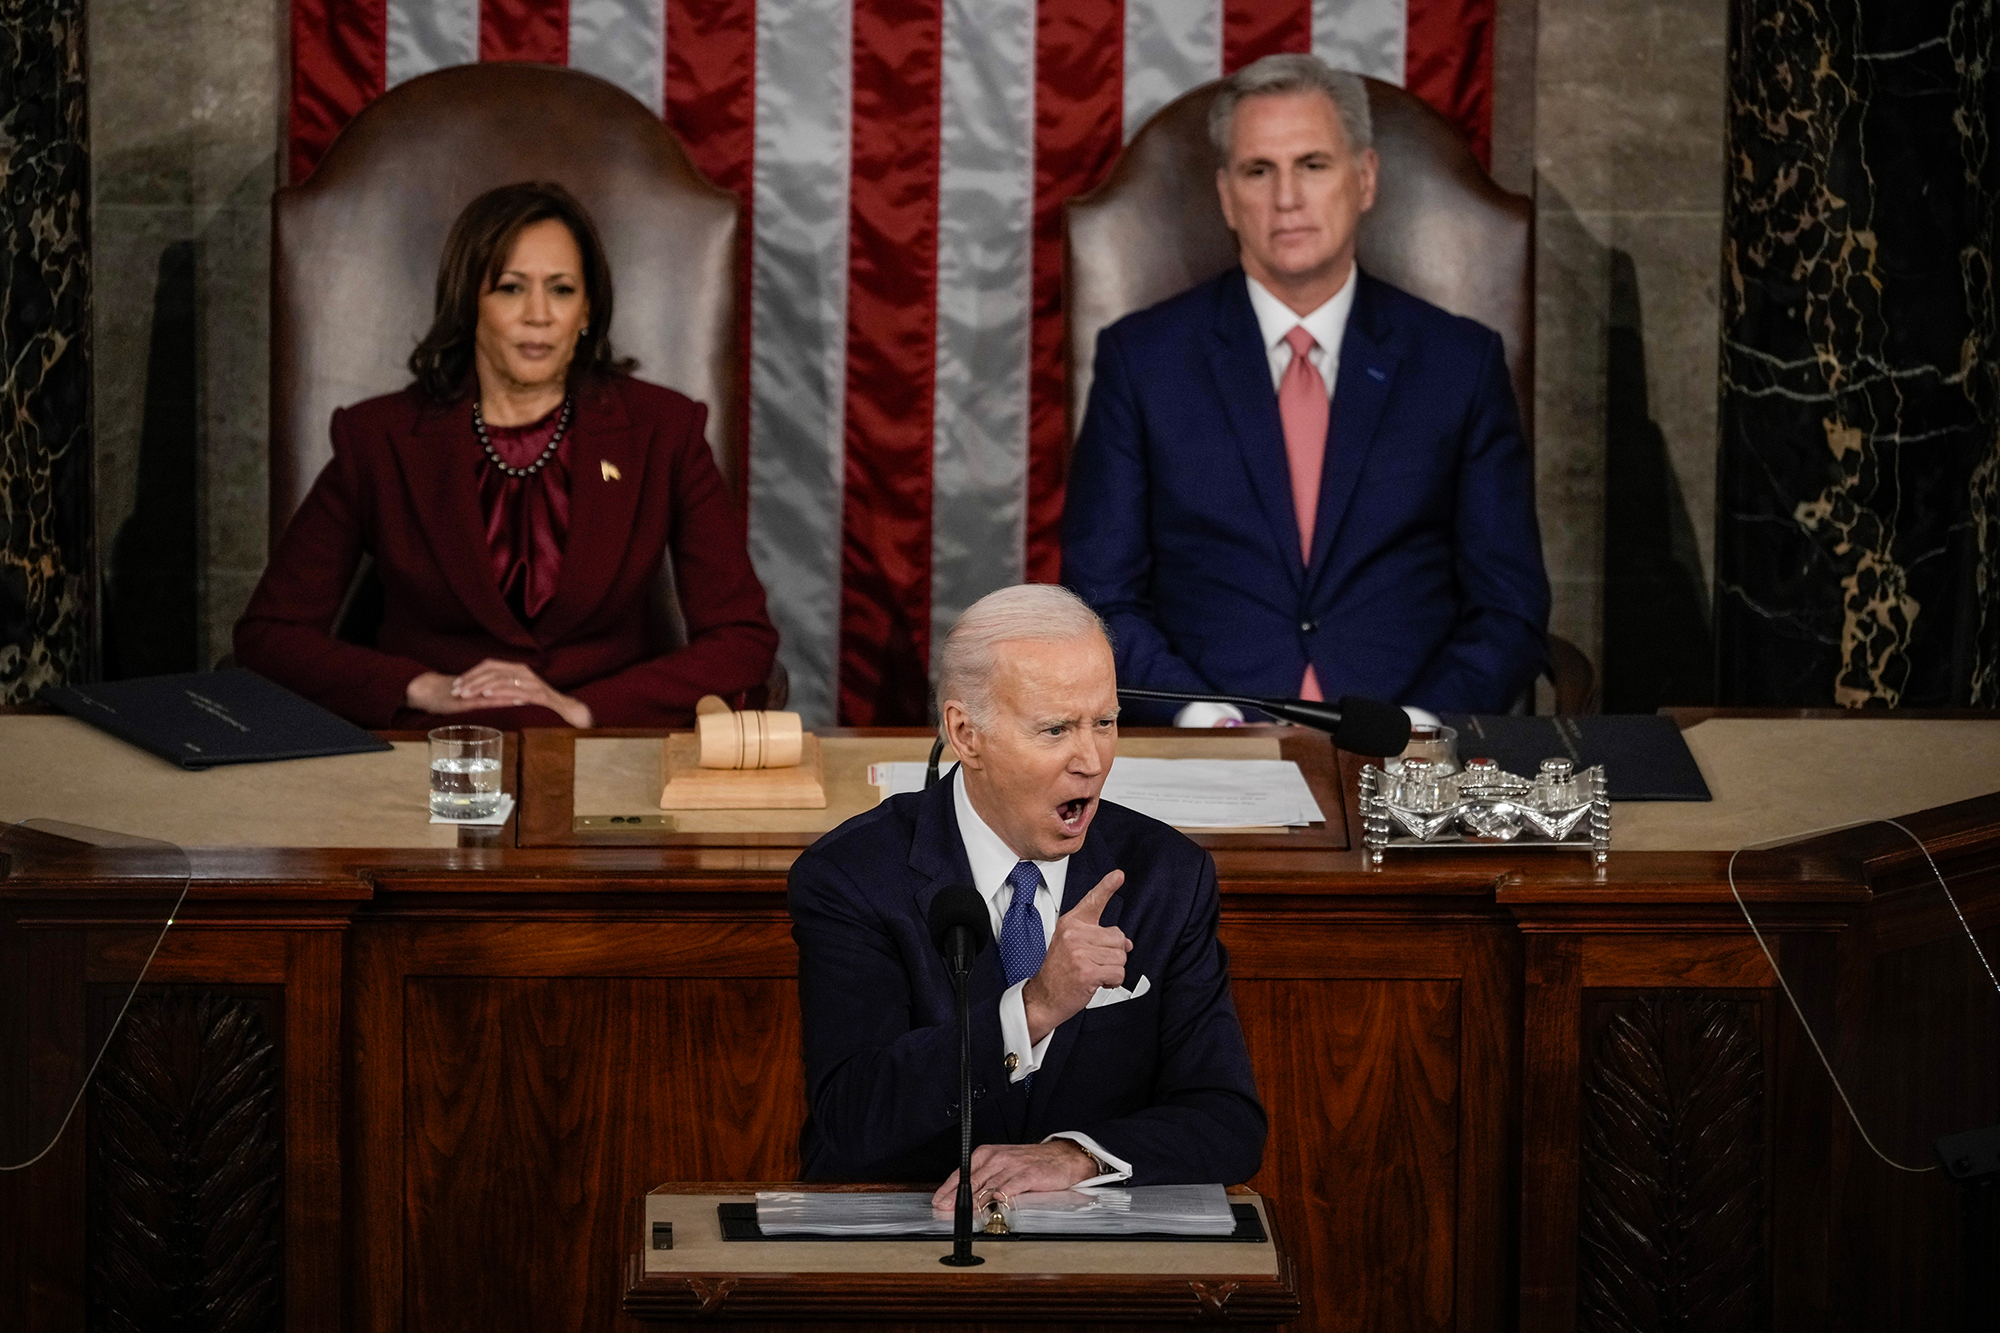 President Joe Biden delivers his State of the Union address during a joint meeting of Congress in the House Chamber.